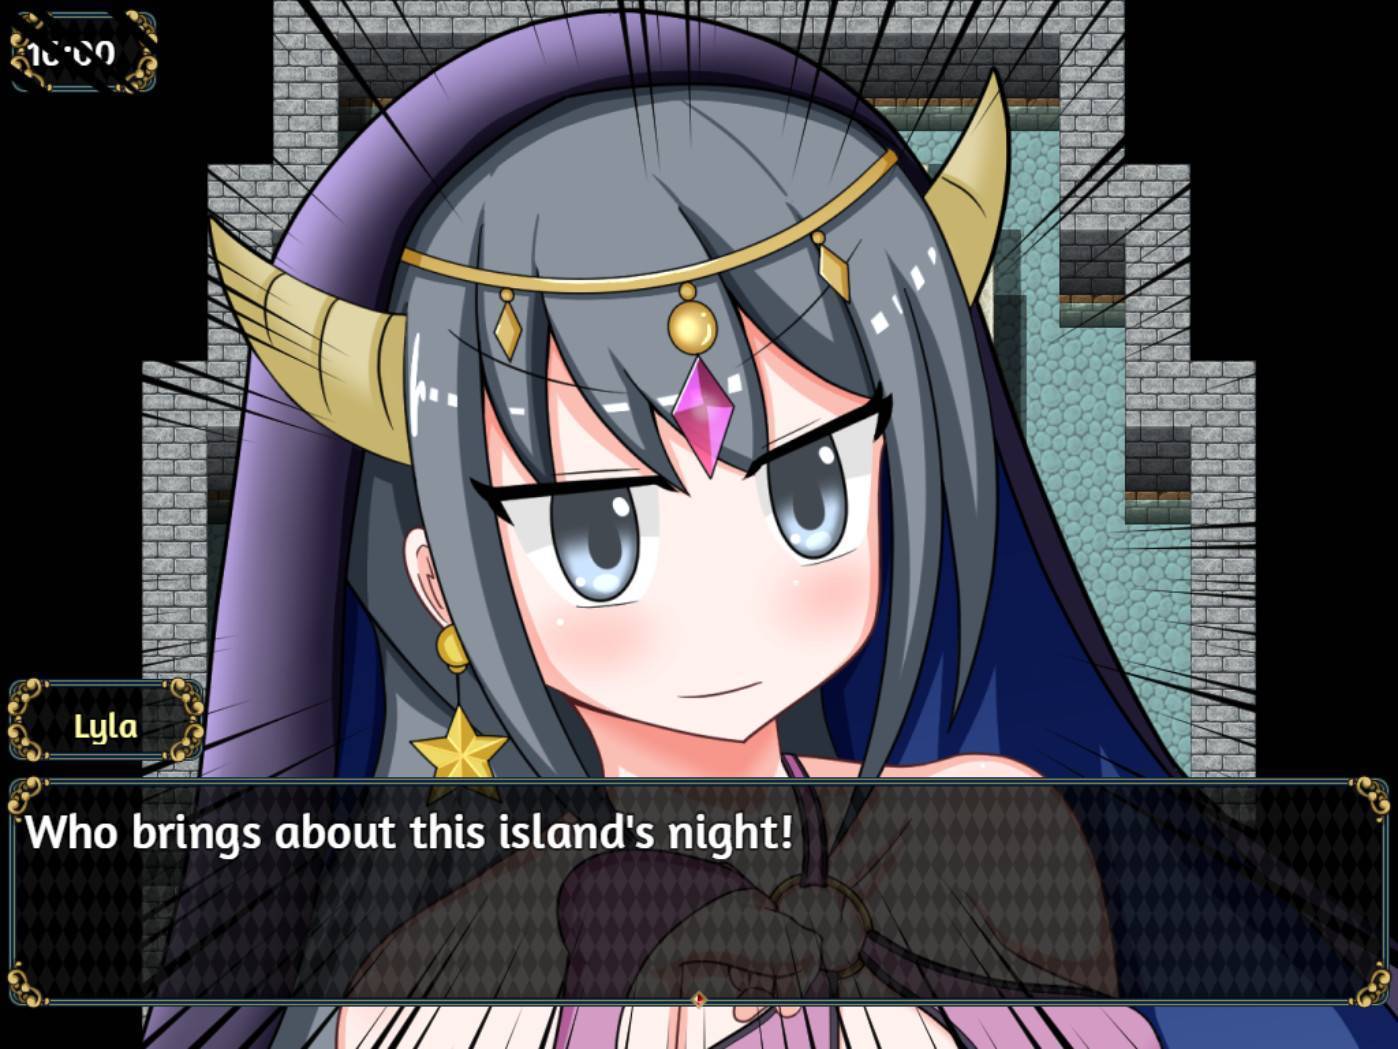 Sylphy and the Sleepless Island (PC) Key cheap - Price of $18.98 for Steam